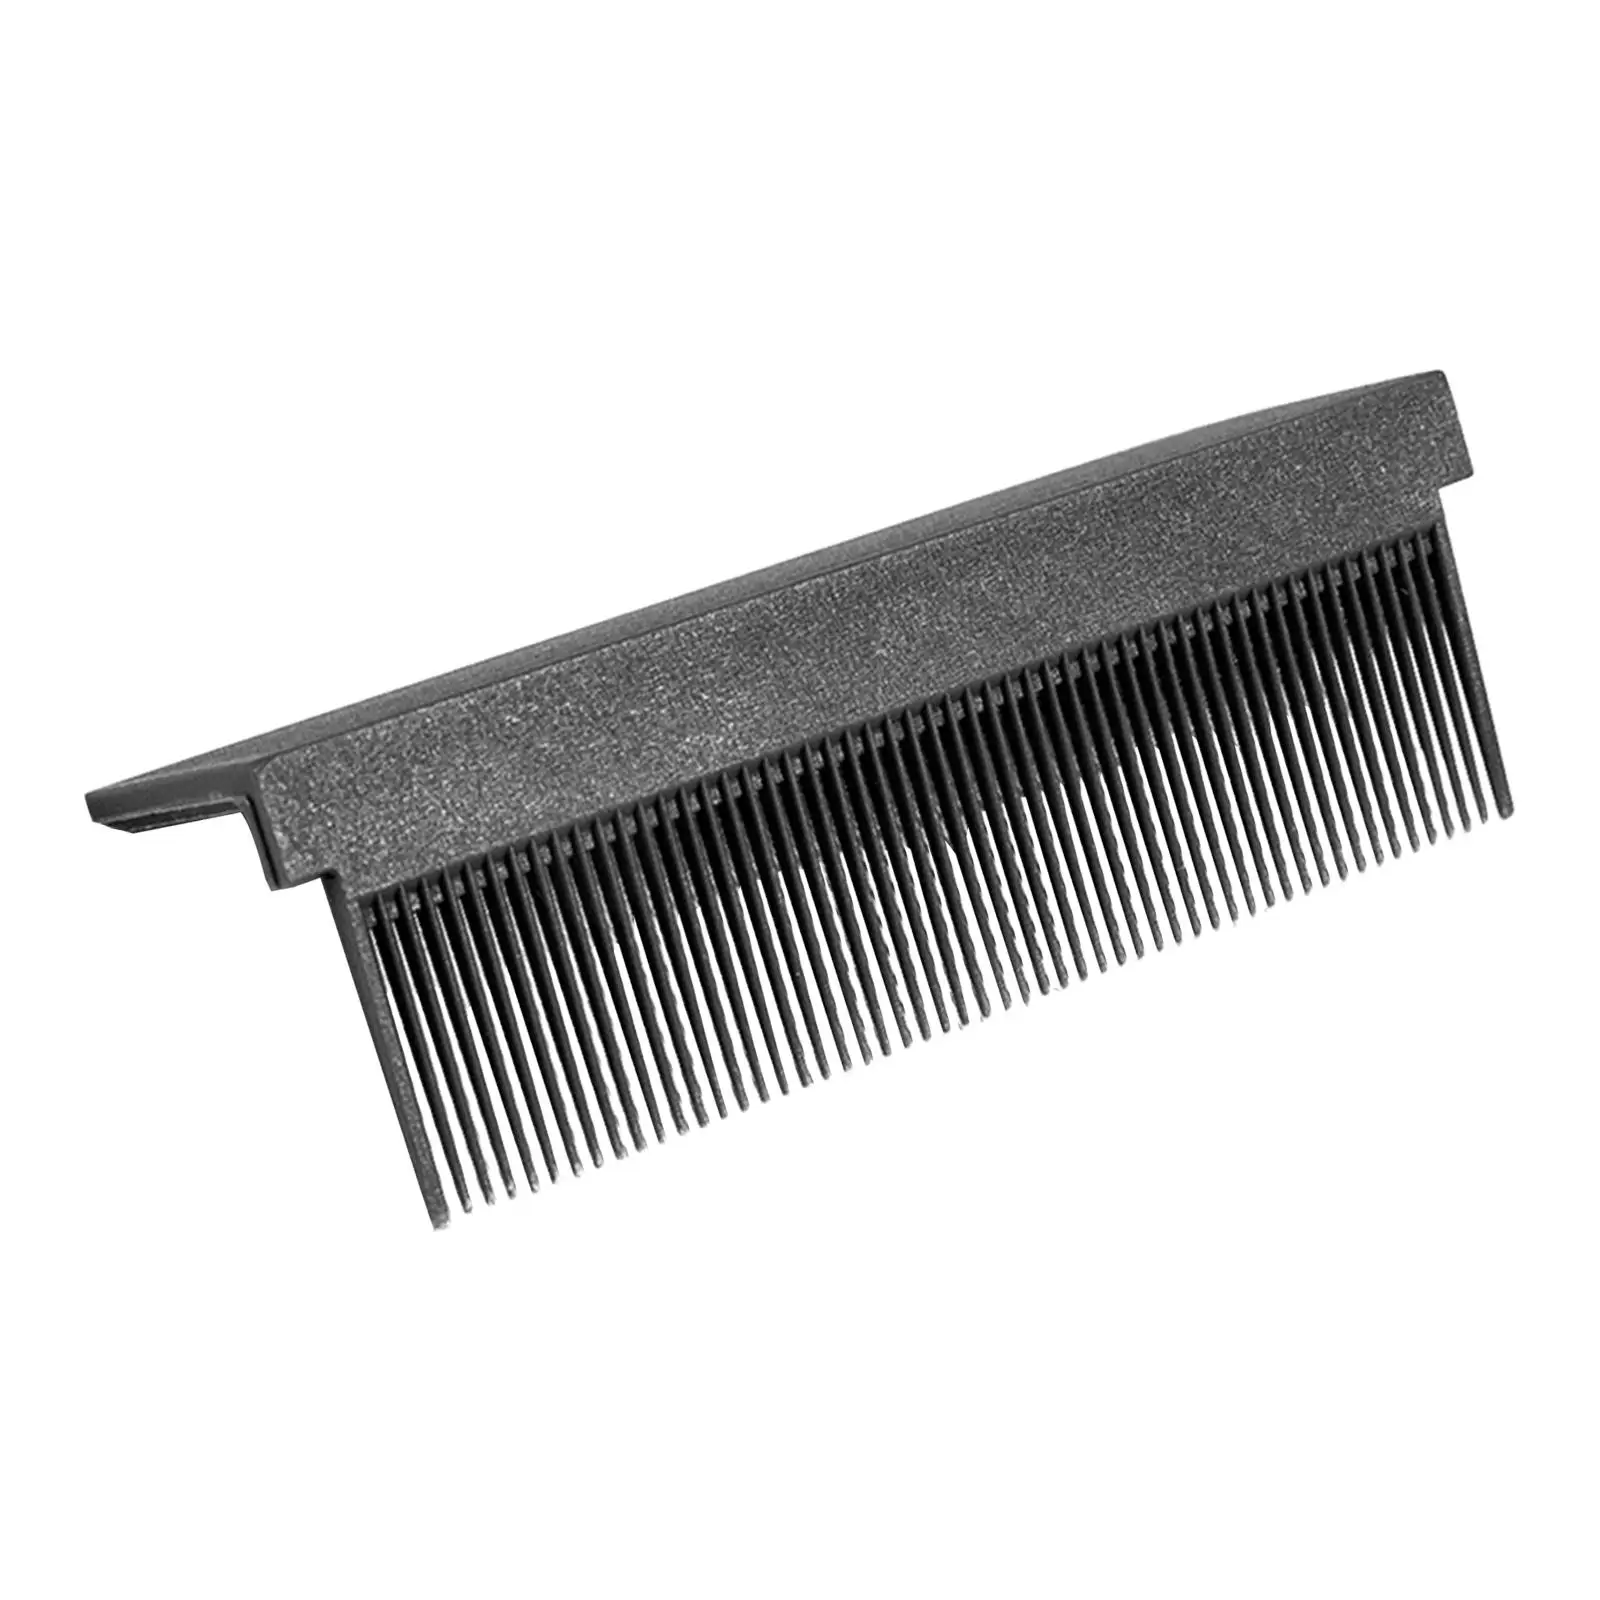 Barber DIY Combs Accessories for Electric Hair Straightener Compact Easily Install Professional V Type Professional or Home Use